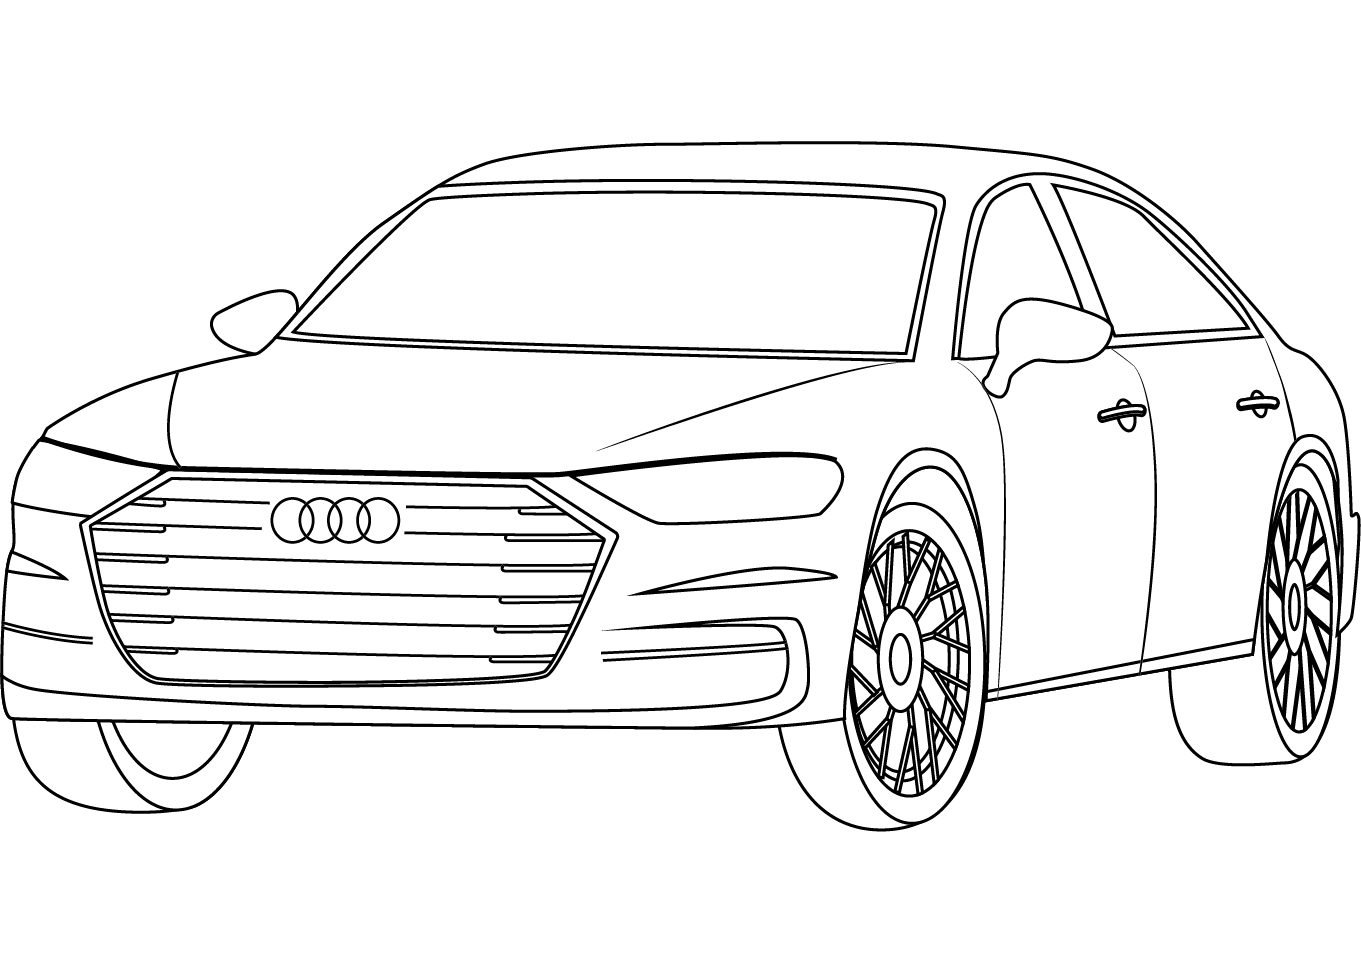 Audi Cars Draw A4 R8 Coloring Pages Colouring Sedan Sports Car Drawing ...